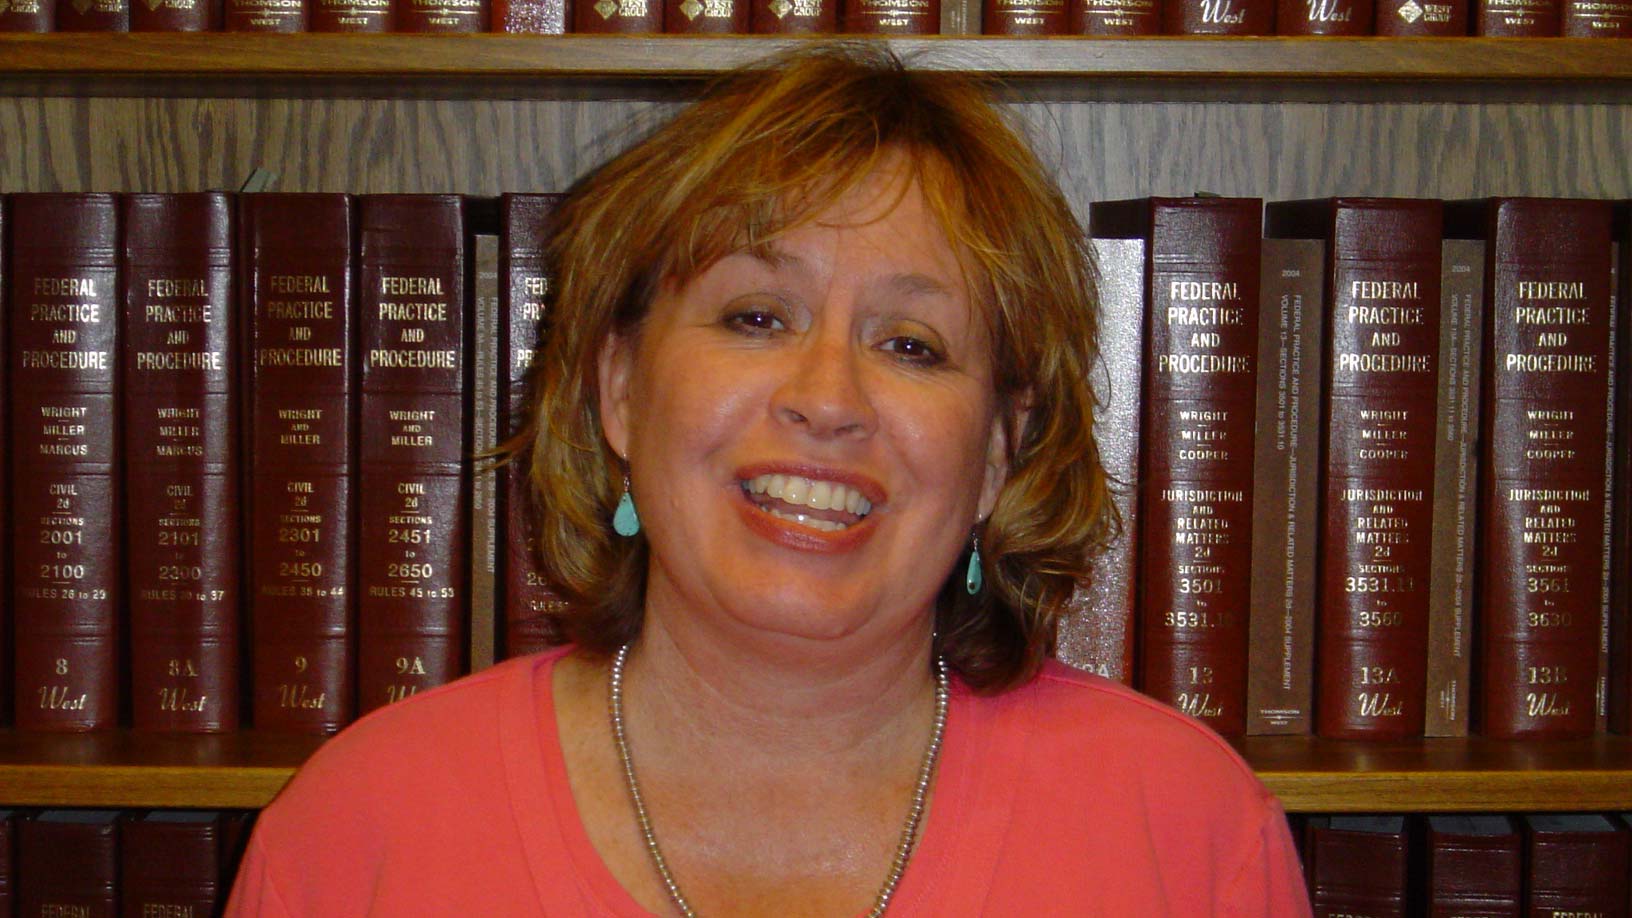 Mary Jo O'Neil is a federal attorney for the U.S. Equal Employment Opportunity Commission